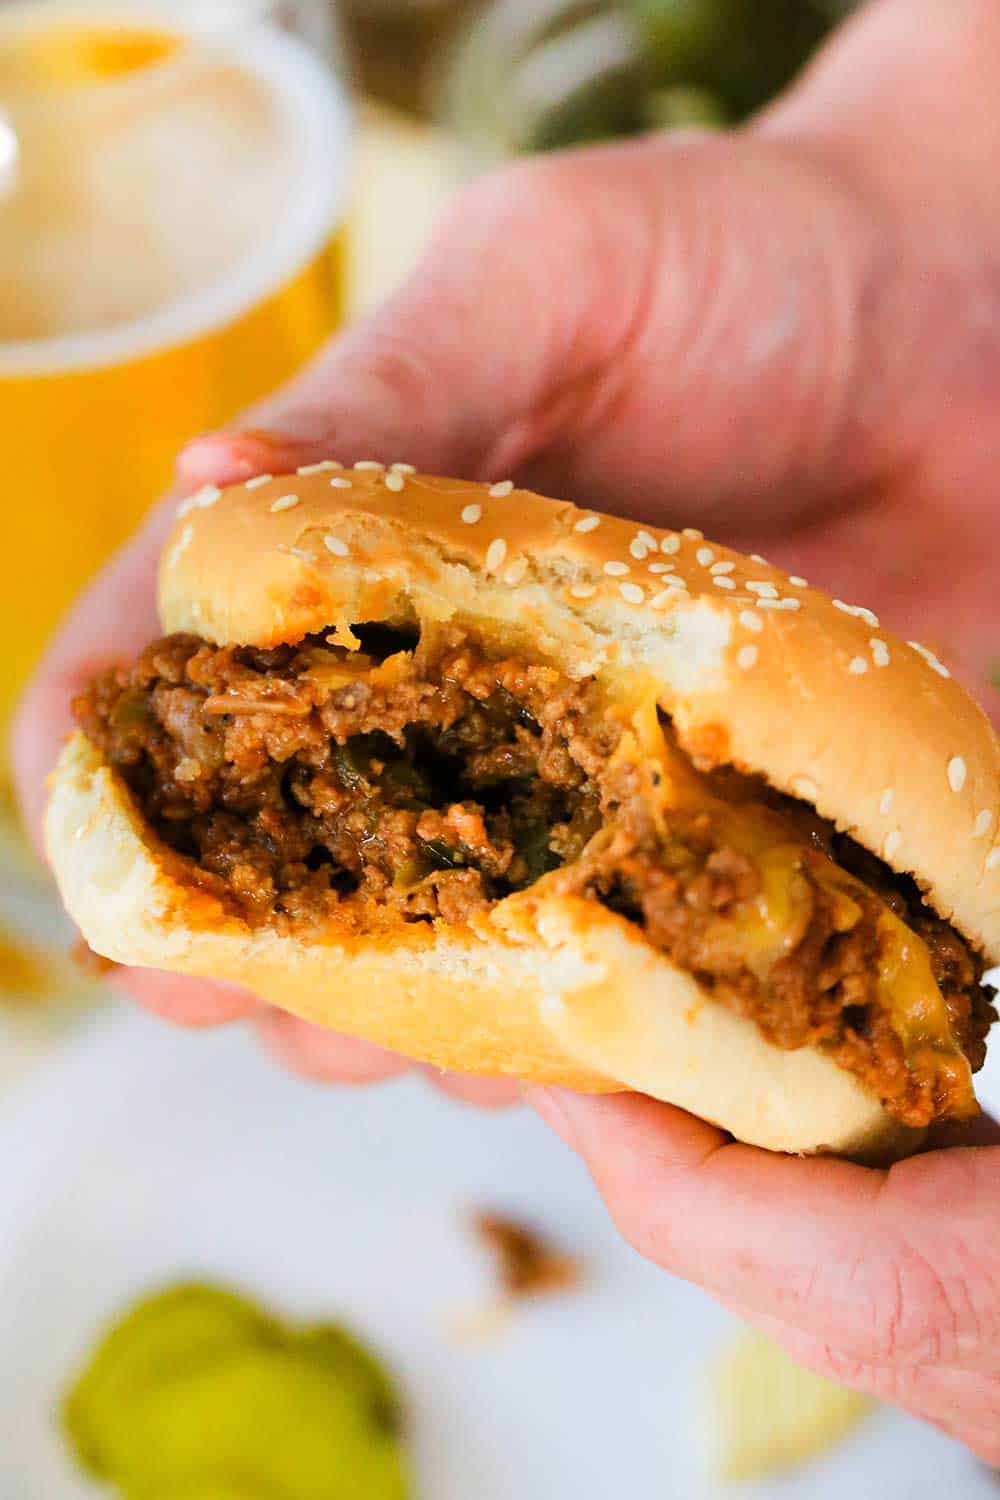 Two hands holding a sloppy joe sandwich with a bite taken out of it. 